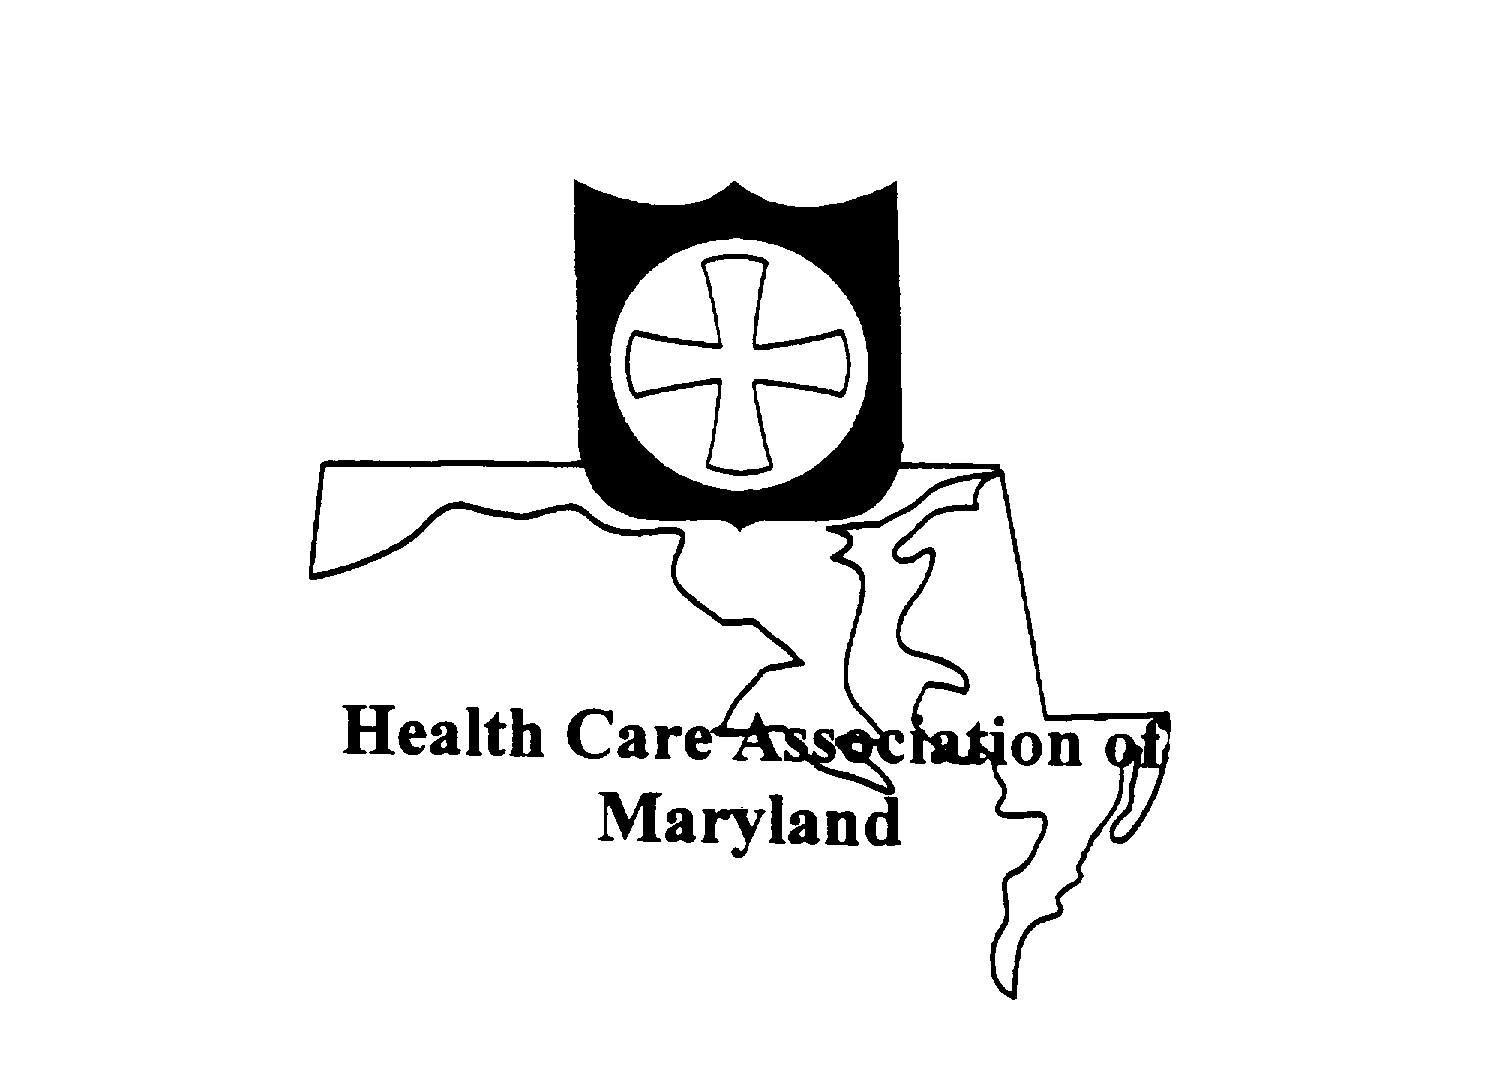  HEALTH CARE ASSOCIATION OF MARYLAND